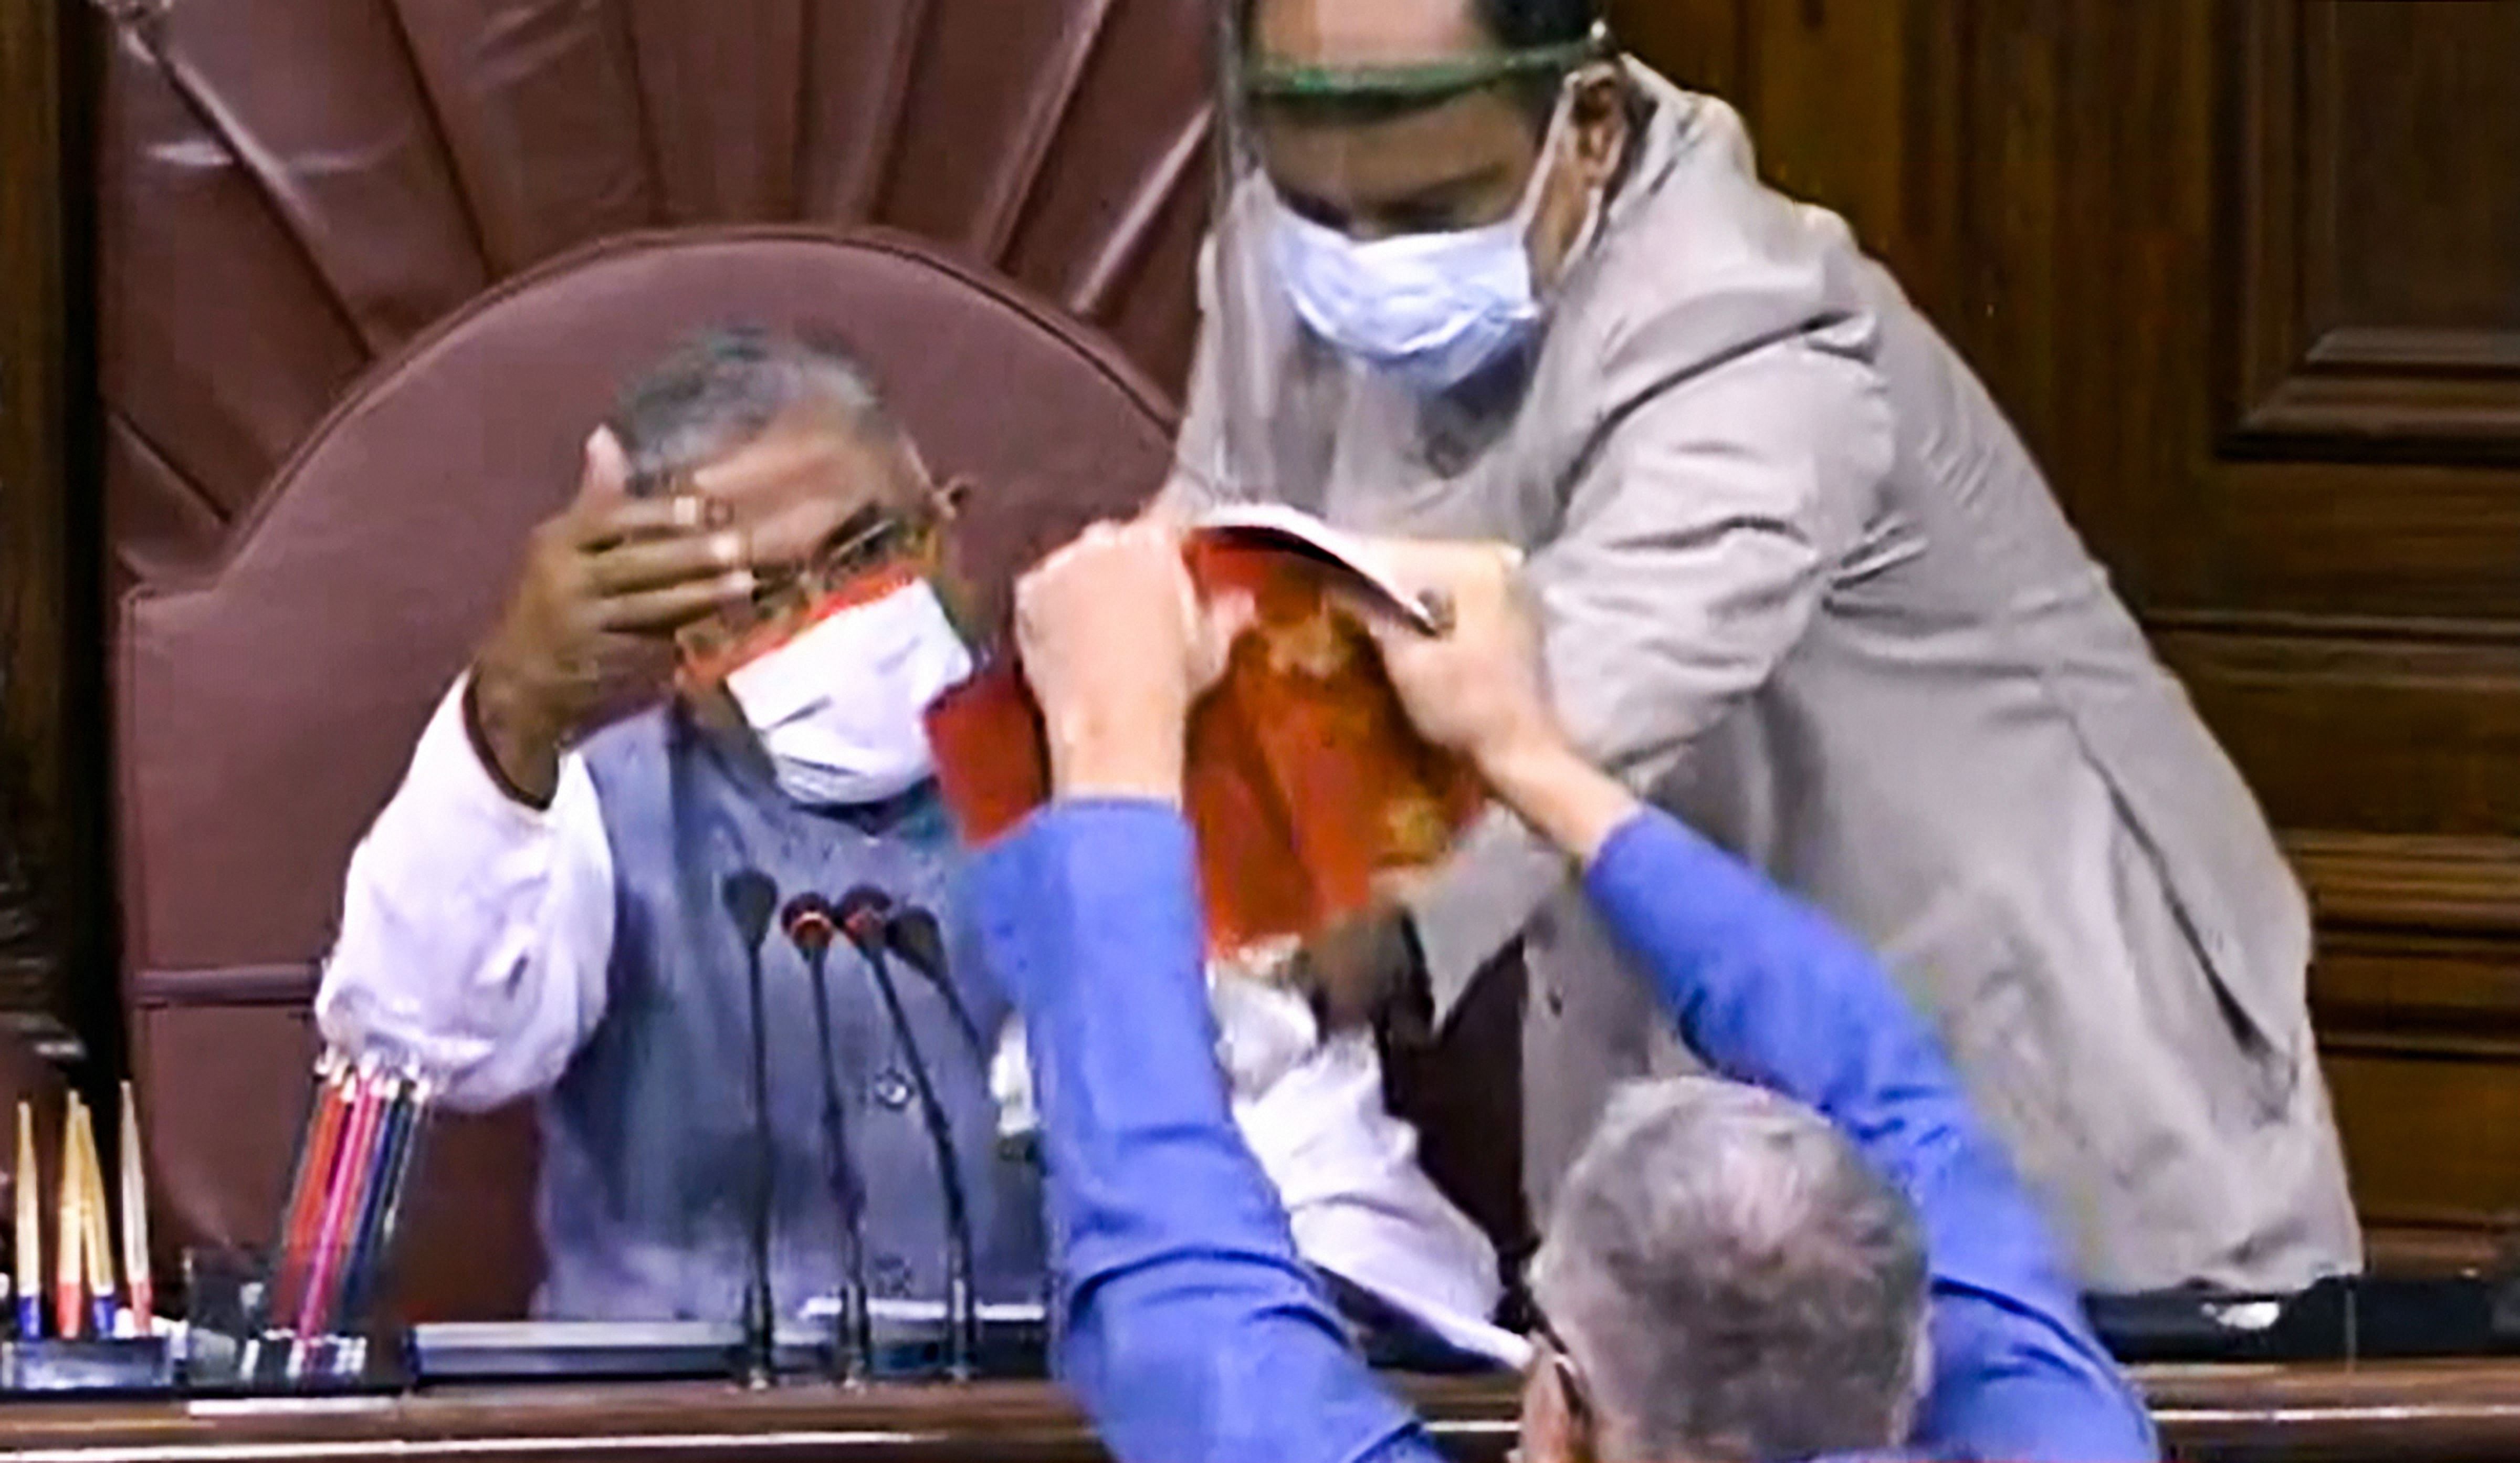 TMC MP Derek O'Brien attempts to tear the rule book as ruckus erupts in the Rajya Sabha over agriculture related bills, during the ongoing Monsoon Session, at Parliament House in New Delhi, Sunday, Sept. 20, 2020. Credit: PTI